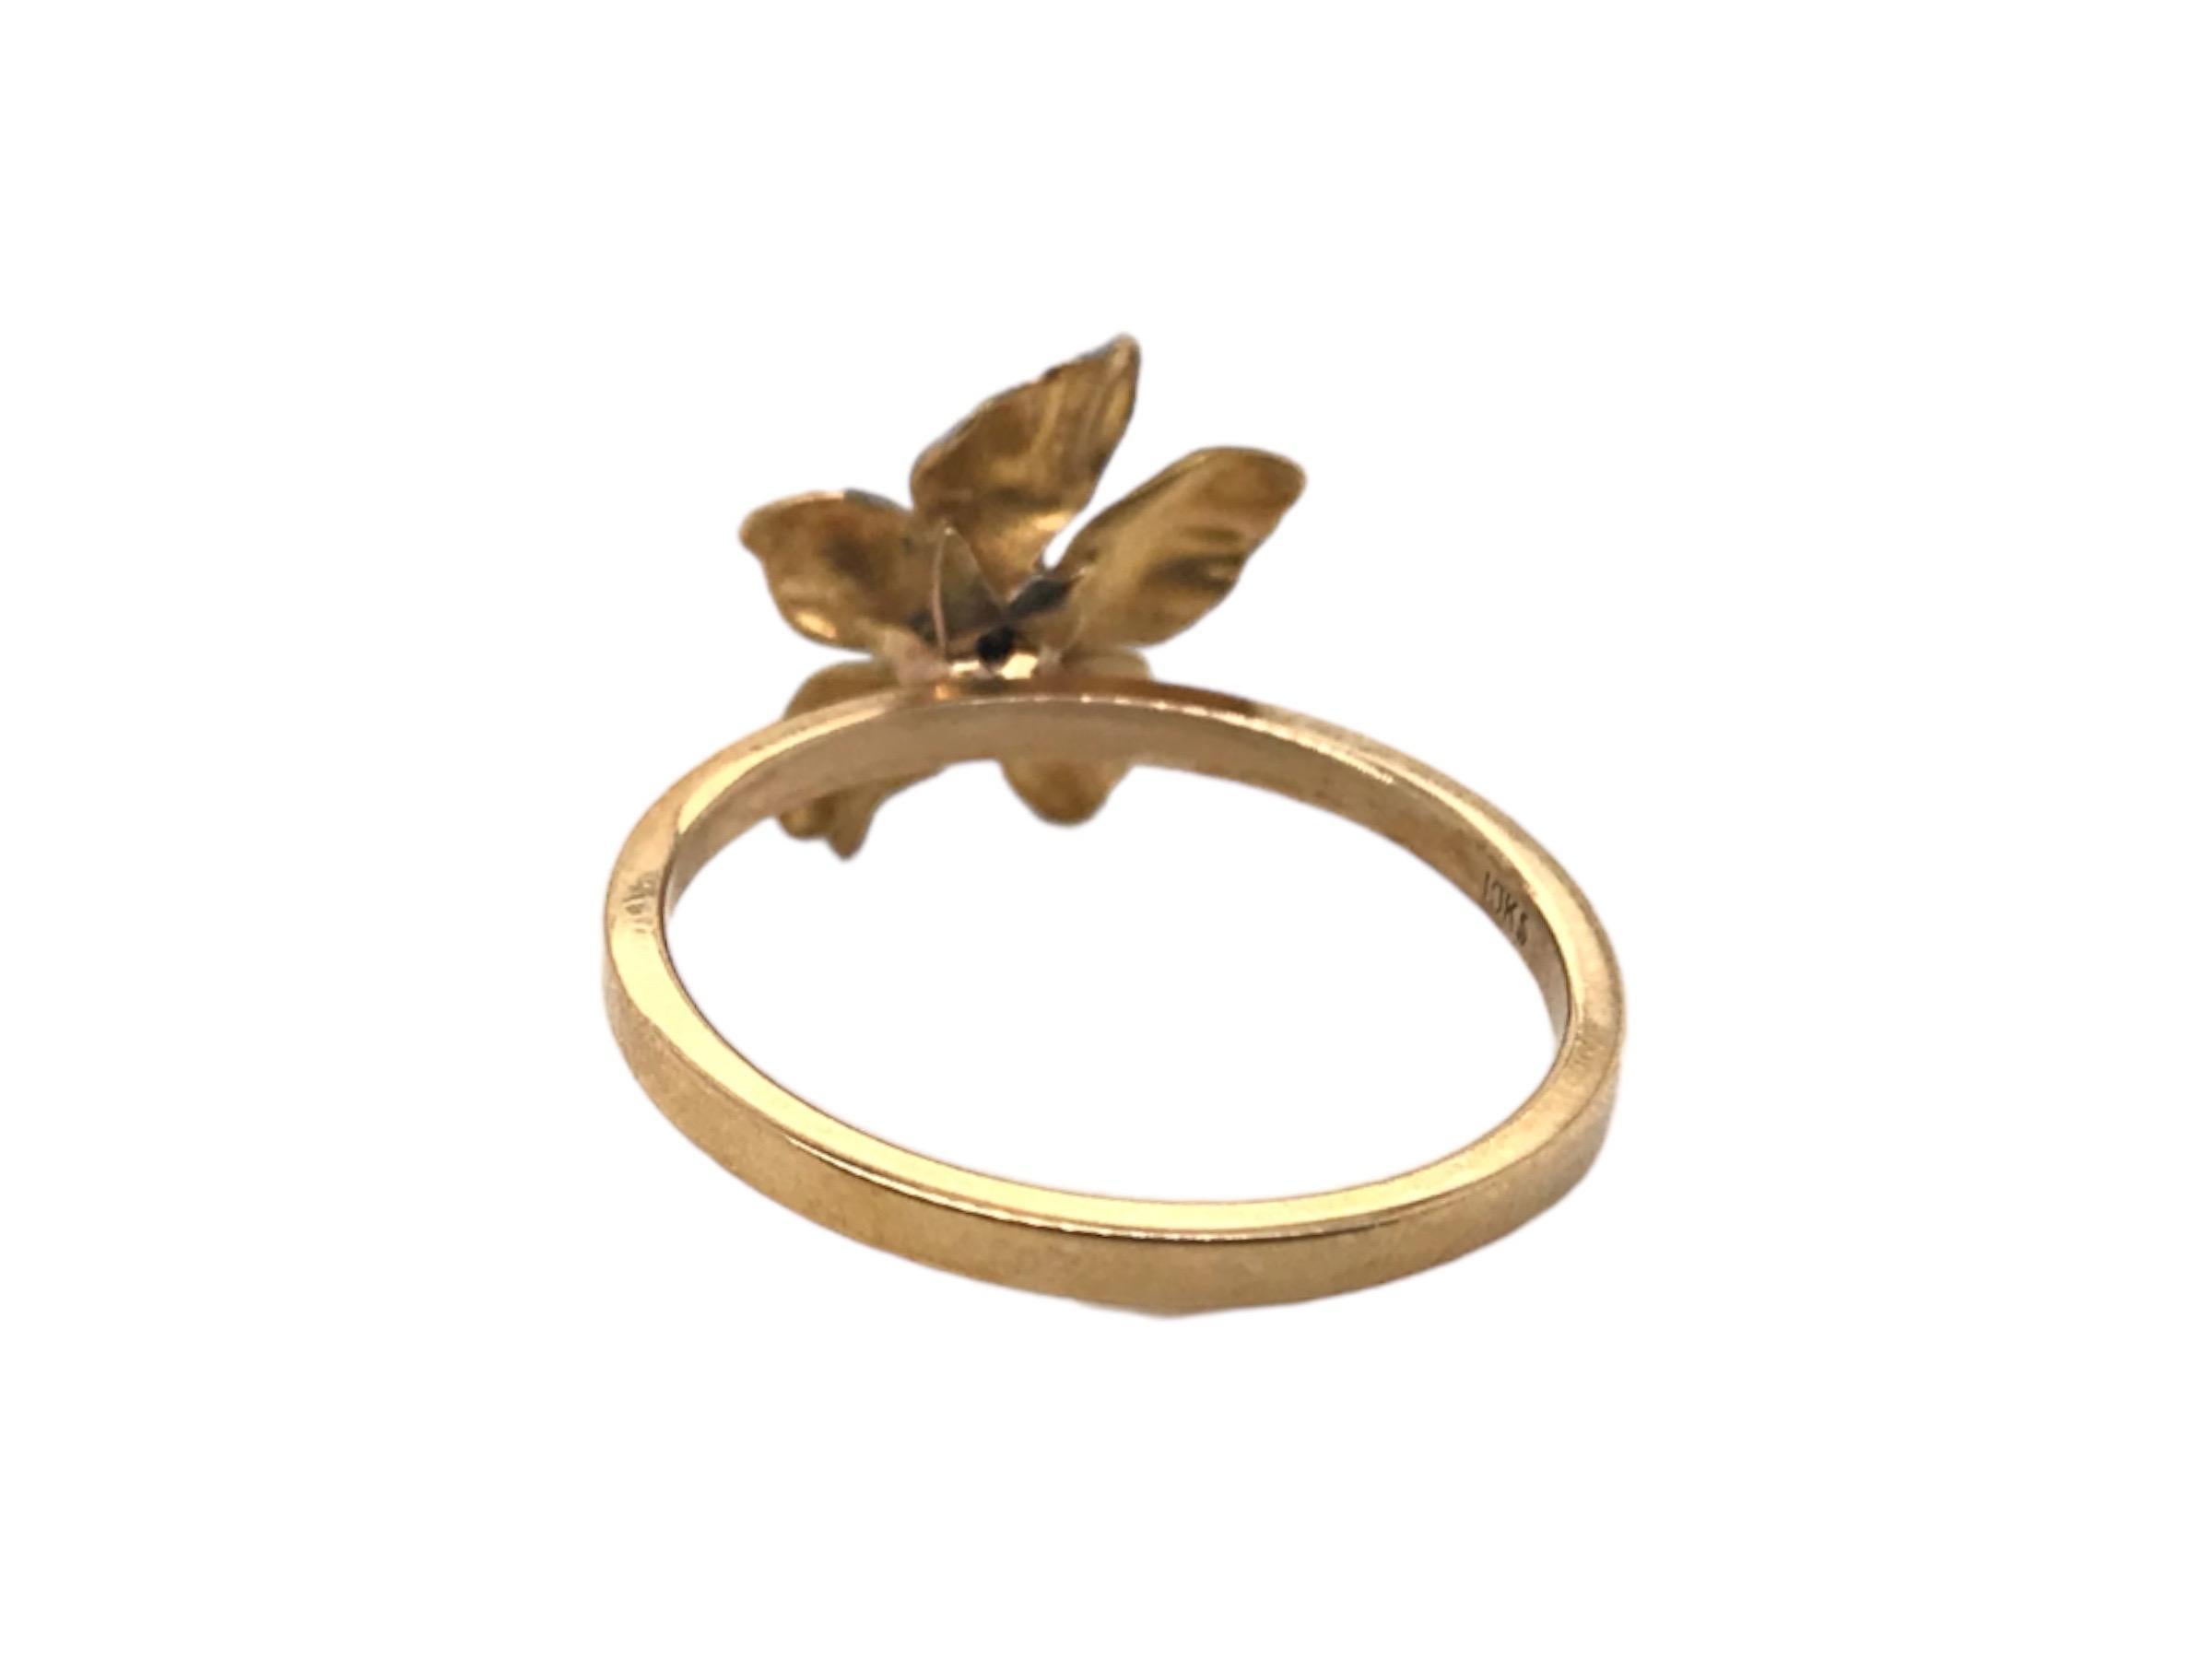 Vintage Enamel Flower Conversion Ring 10K Yellow Gold In Good Condition For Sale In Montgomery, AL